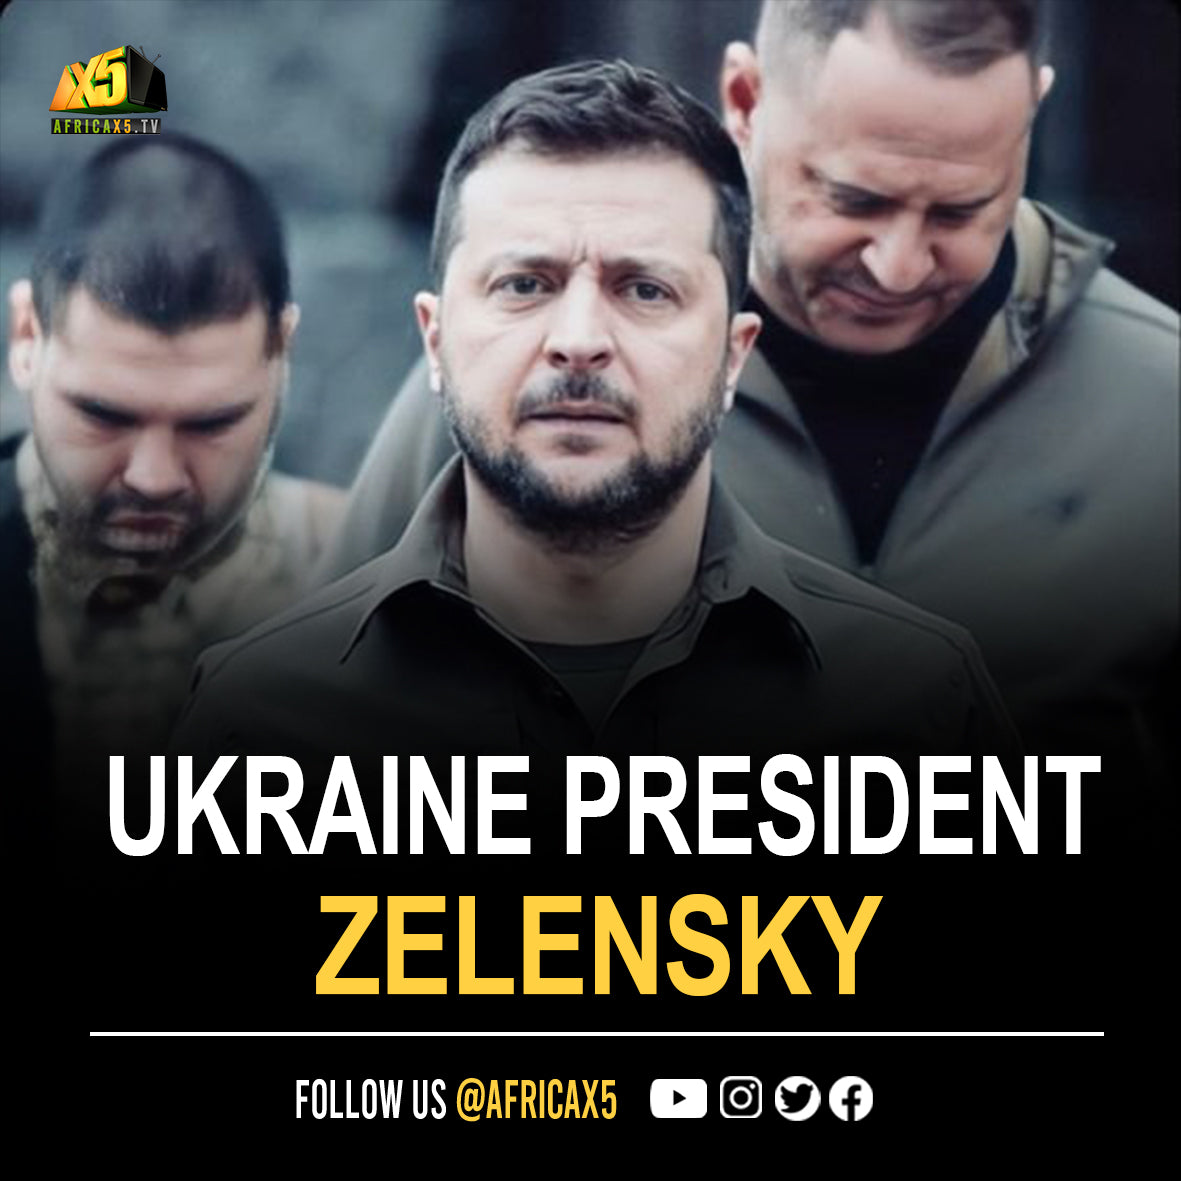 Ukraine's President Volodymyr Zelensky has urged African countries “not to stay neutral” and 'silent' in the ongoing Russian missile strikes across the country